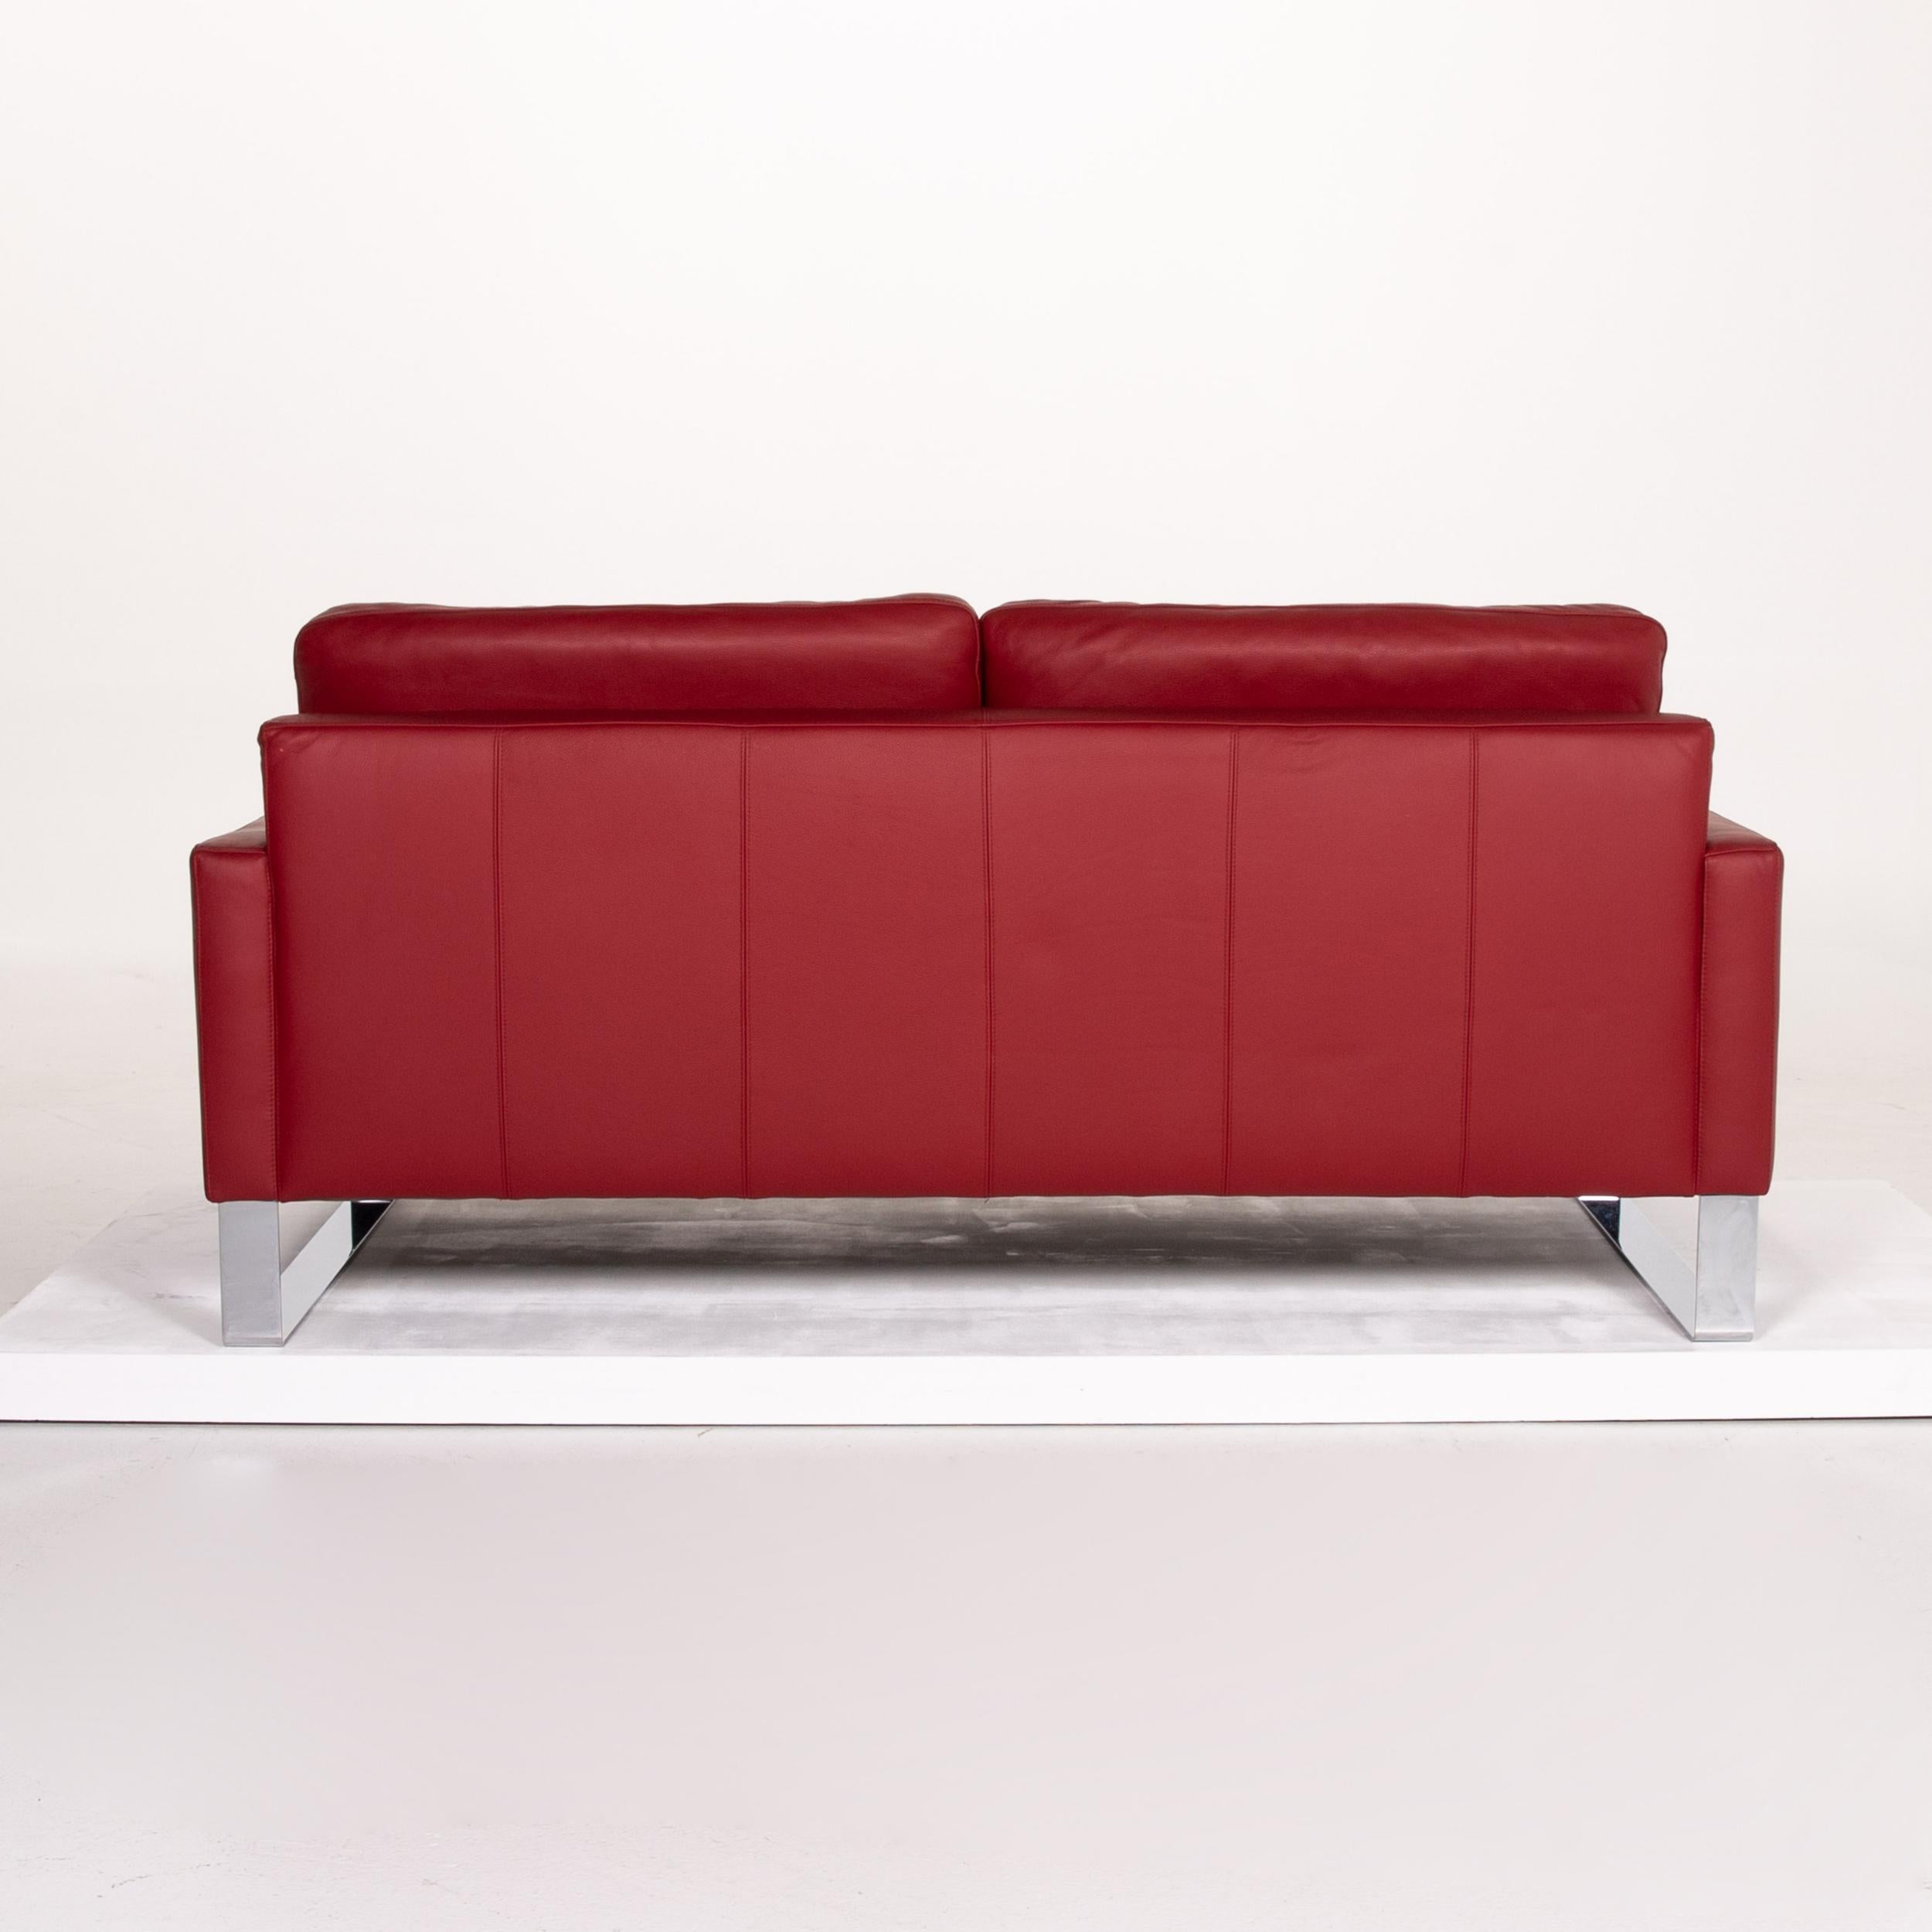 We present to you a Machalke leather sofa red two-seat couch # 13906t.


 Product measurements in centimeters:
 

Depth 96
Width 187
Height 86
Seat height 45
Rest height 59
Seat depth 54
Seat width 162
Back height 39.
 